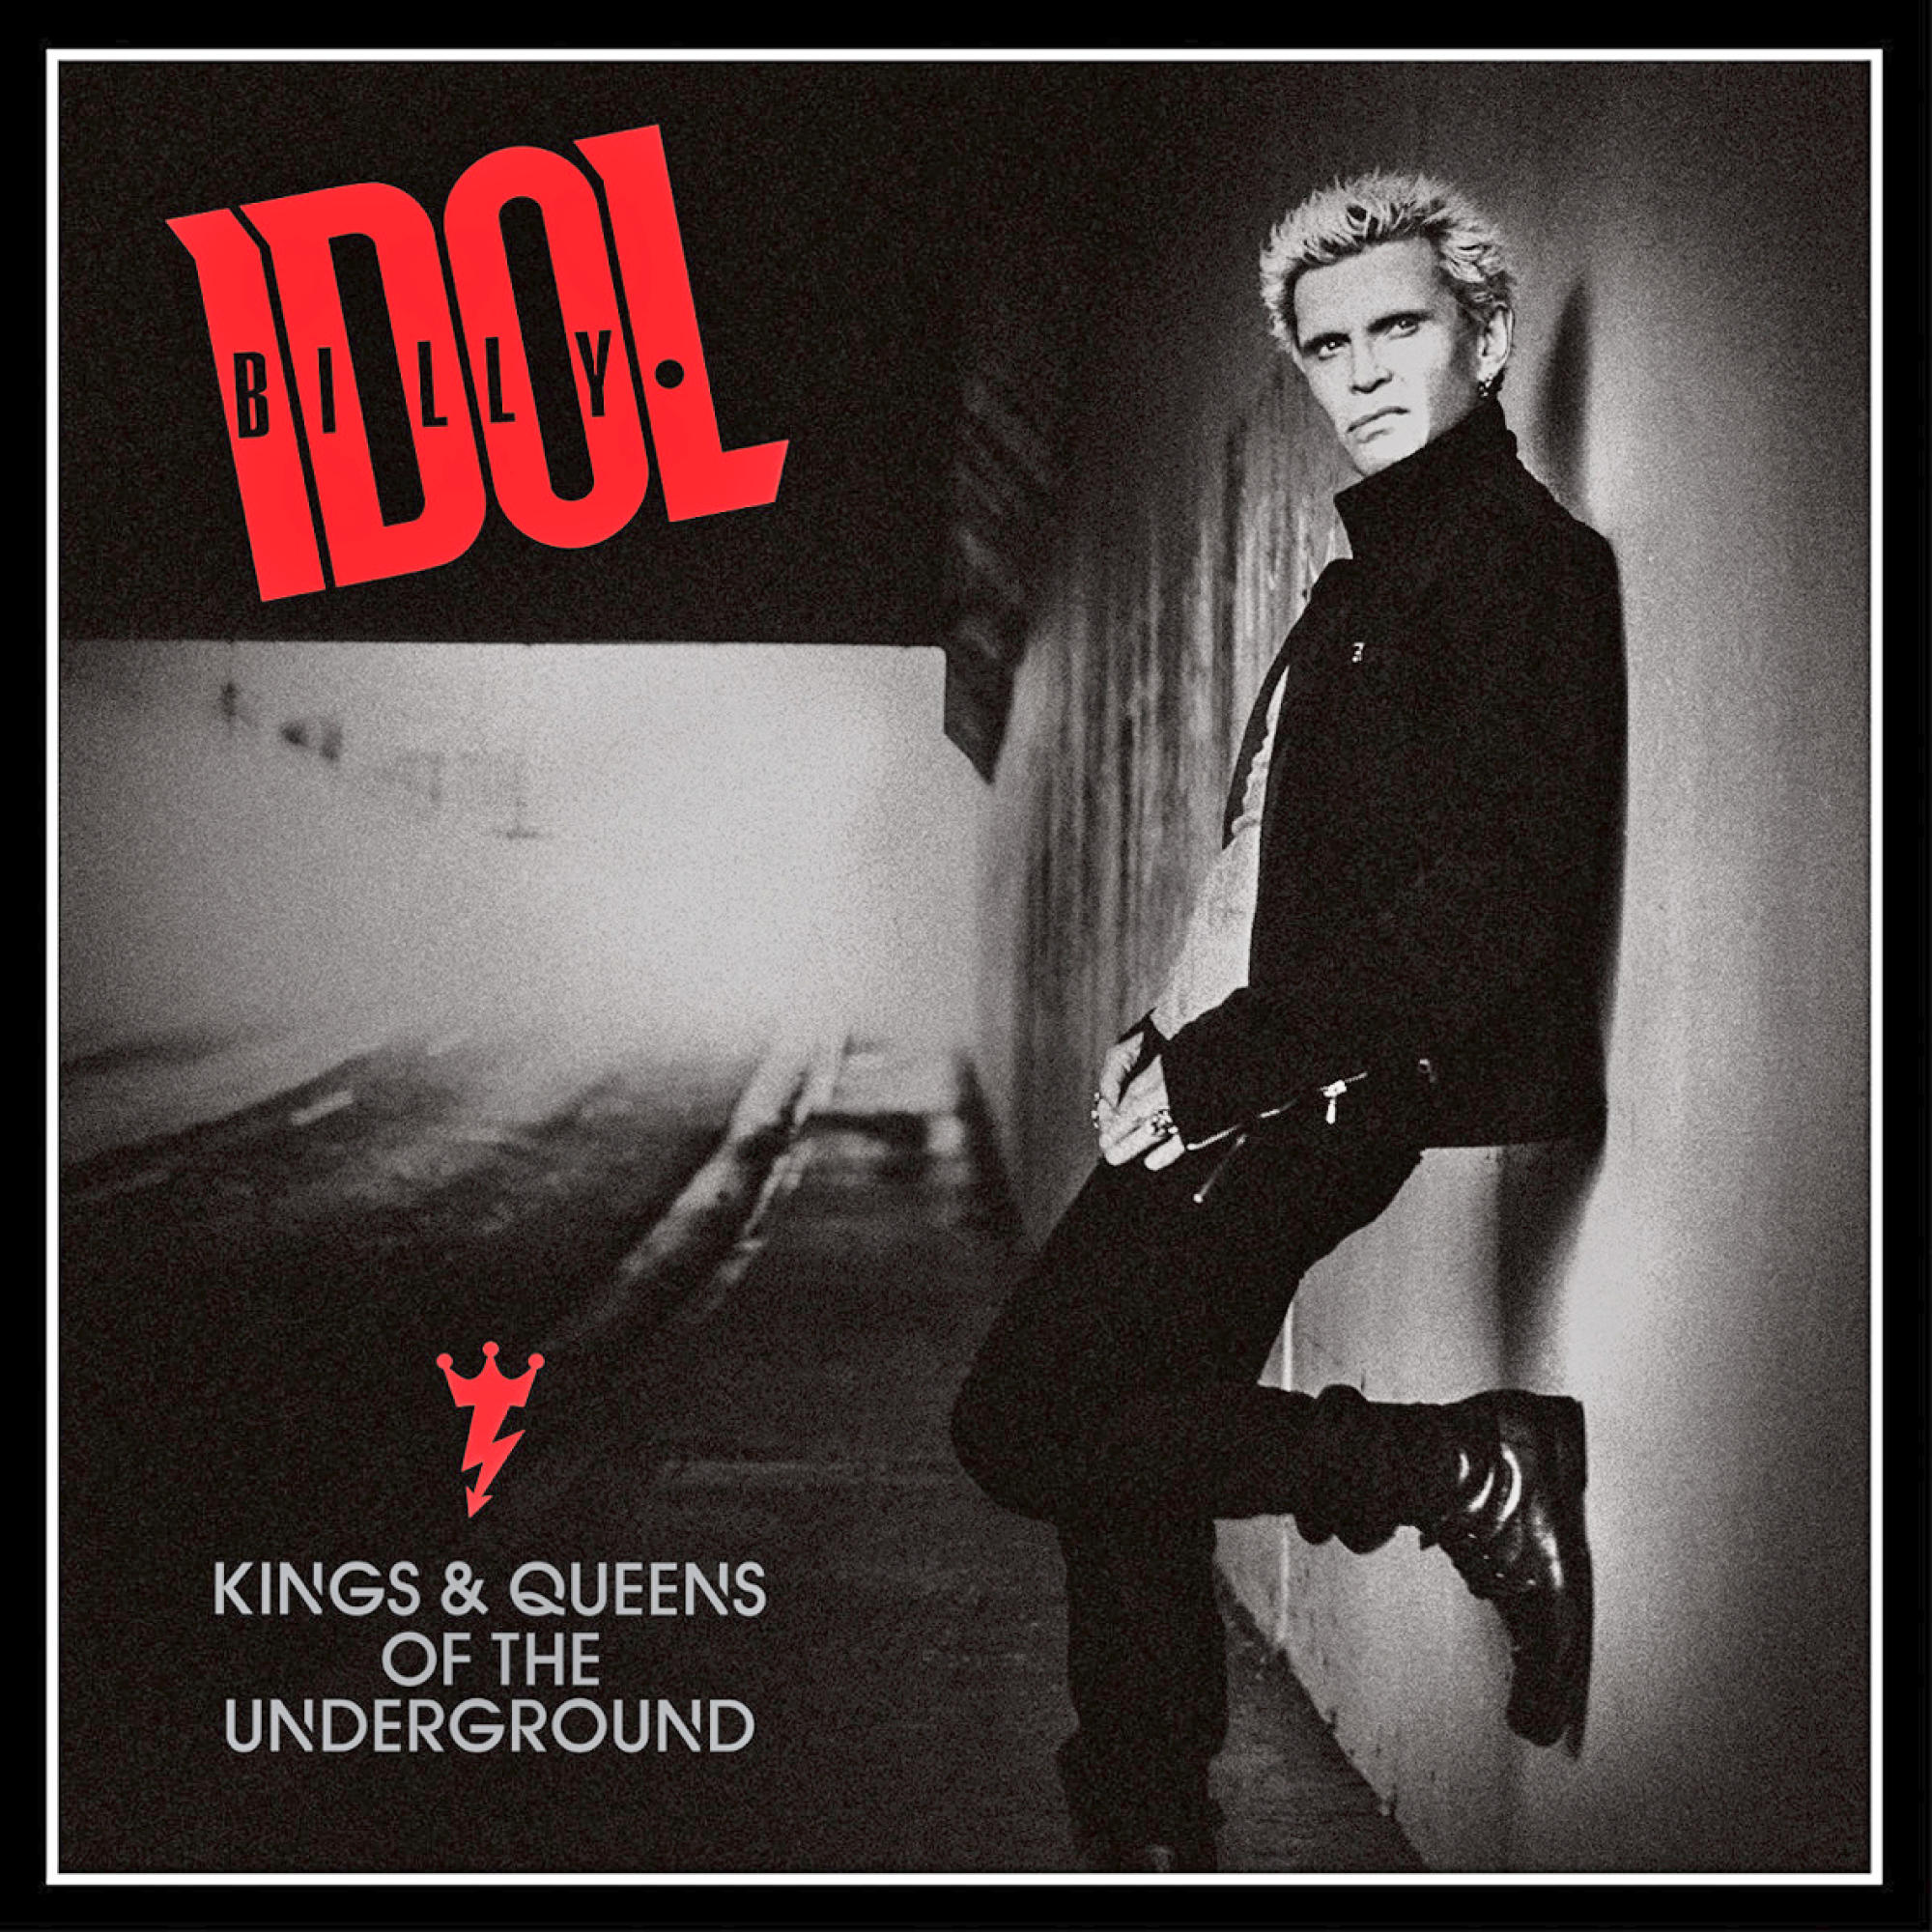 (CD) Of - & The Kings Idol - Underground Queens Billy